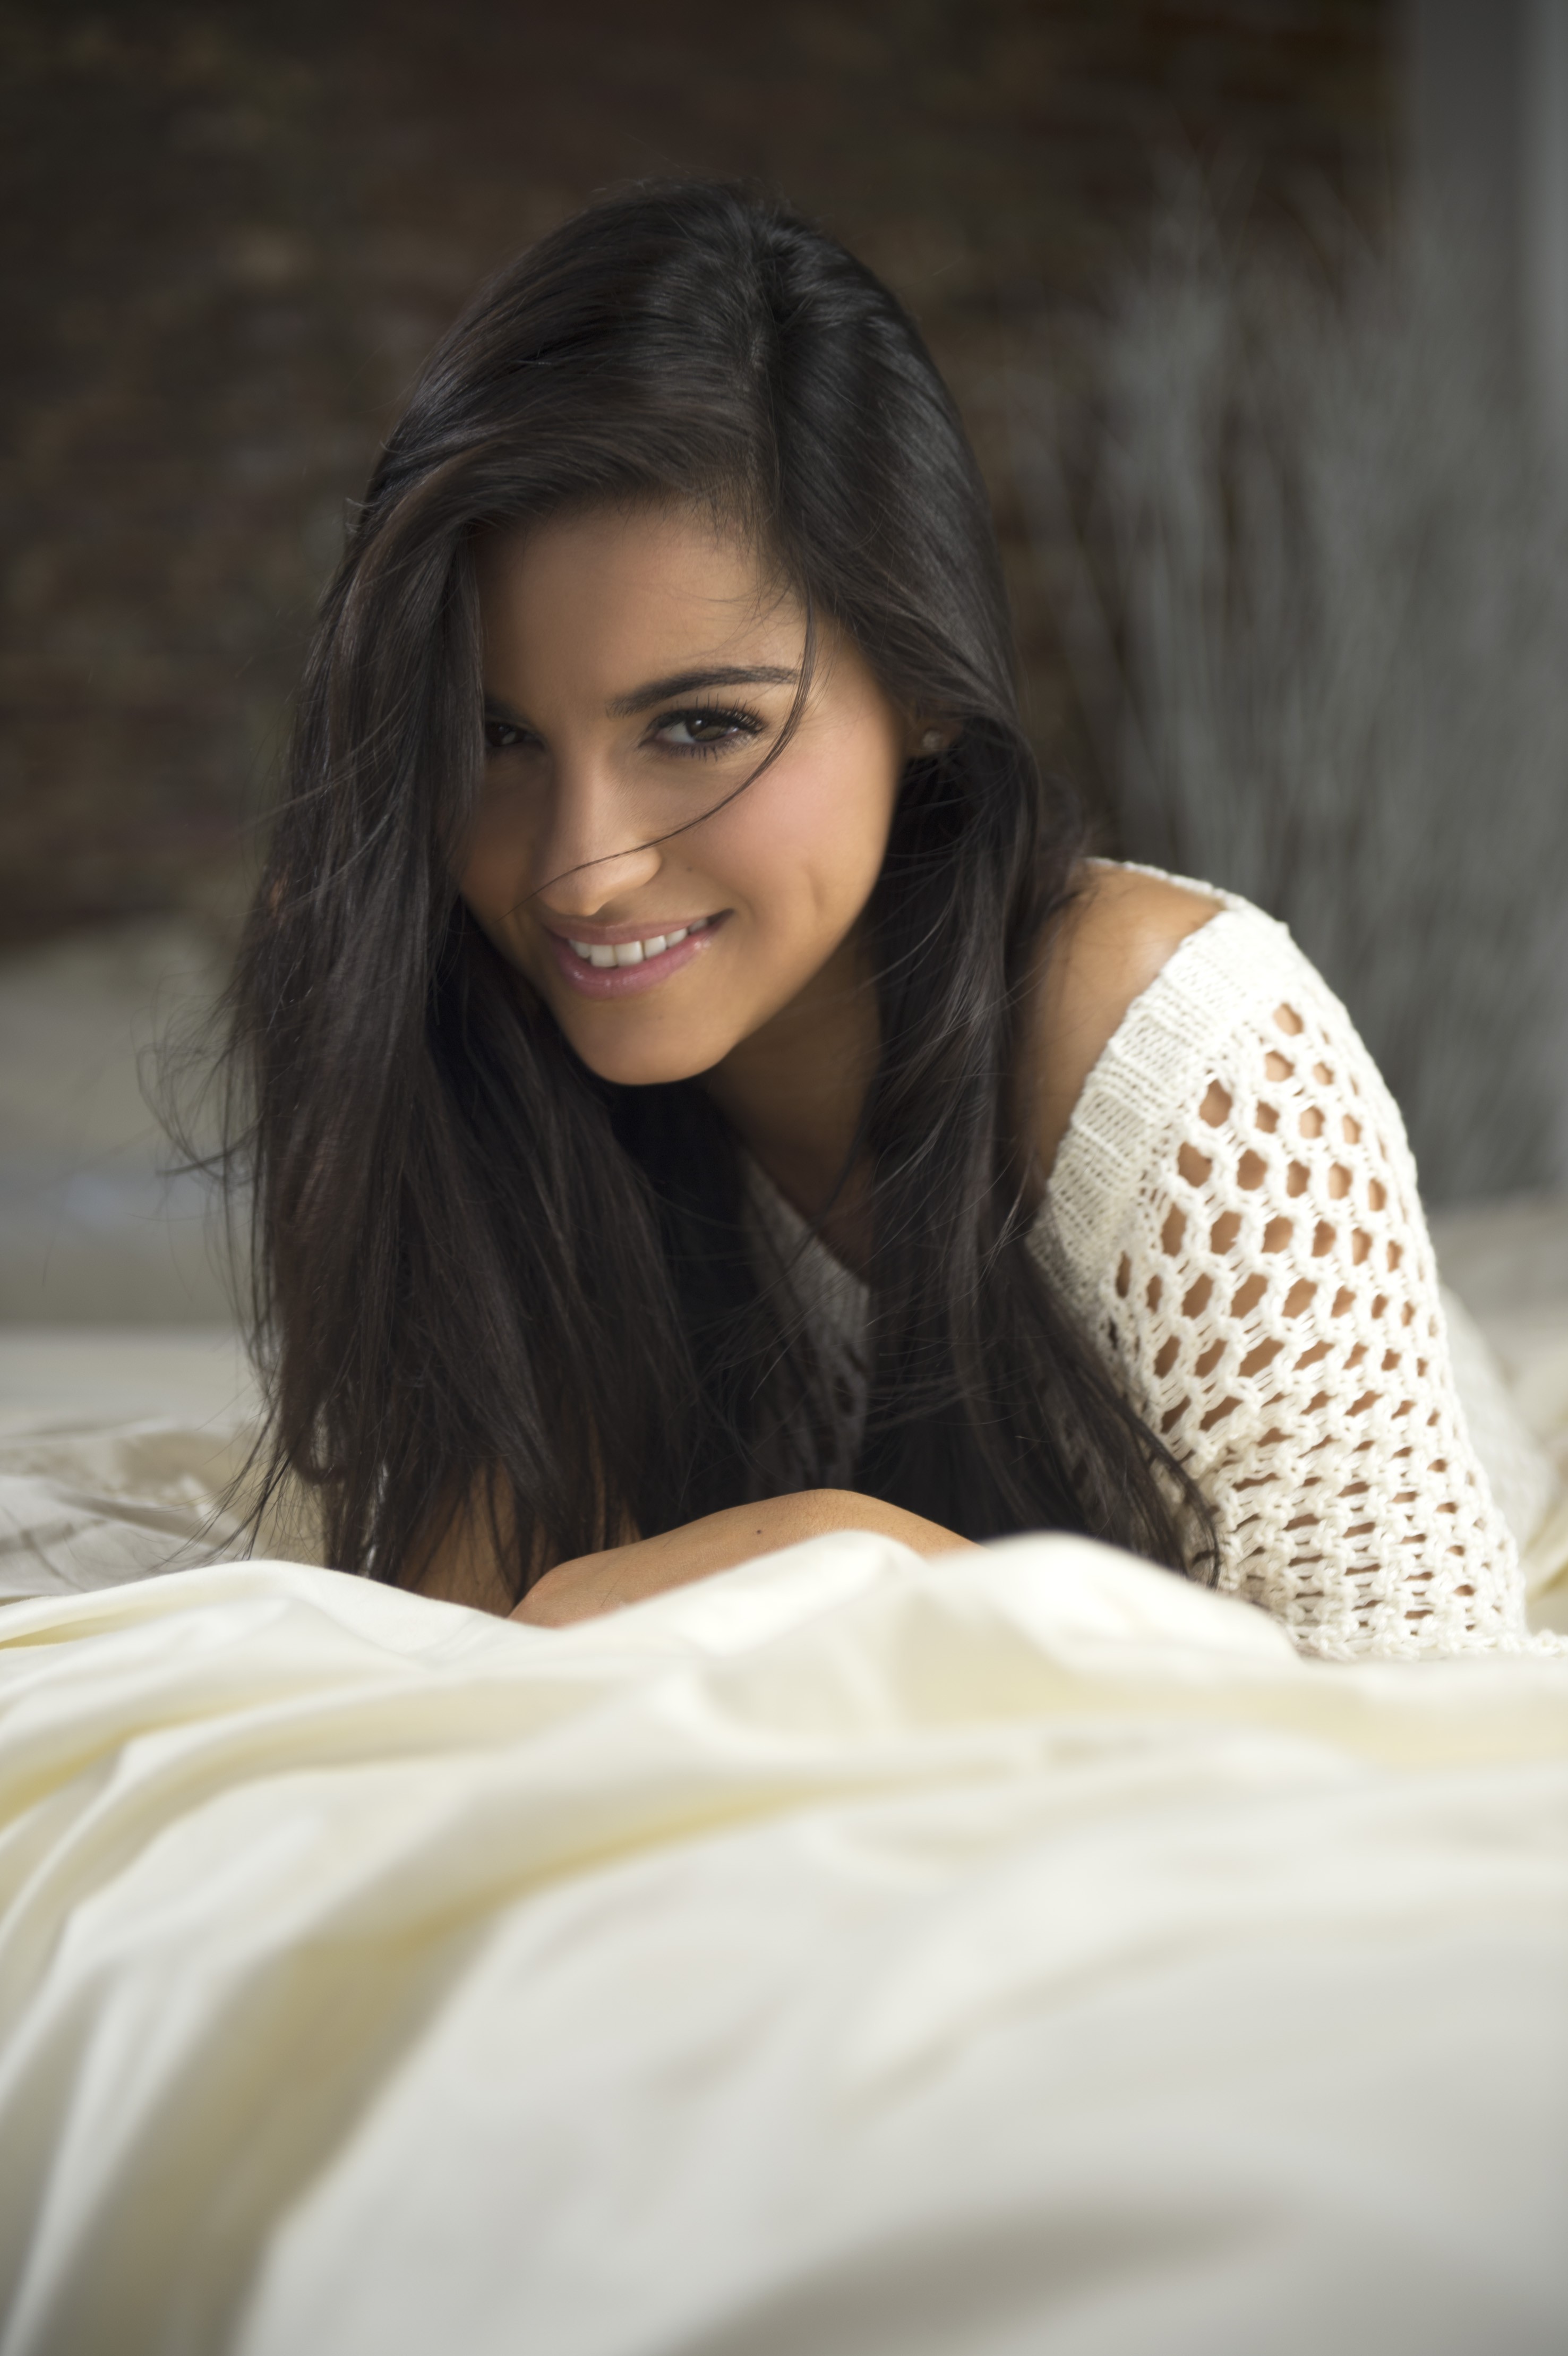 People 2953x4436 Maite Perroni Latinas women Mexican mexican model black hair white sweater long hair smiling actress hair in face white clothing straight hair pink lipstick pearl earrings